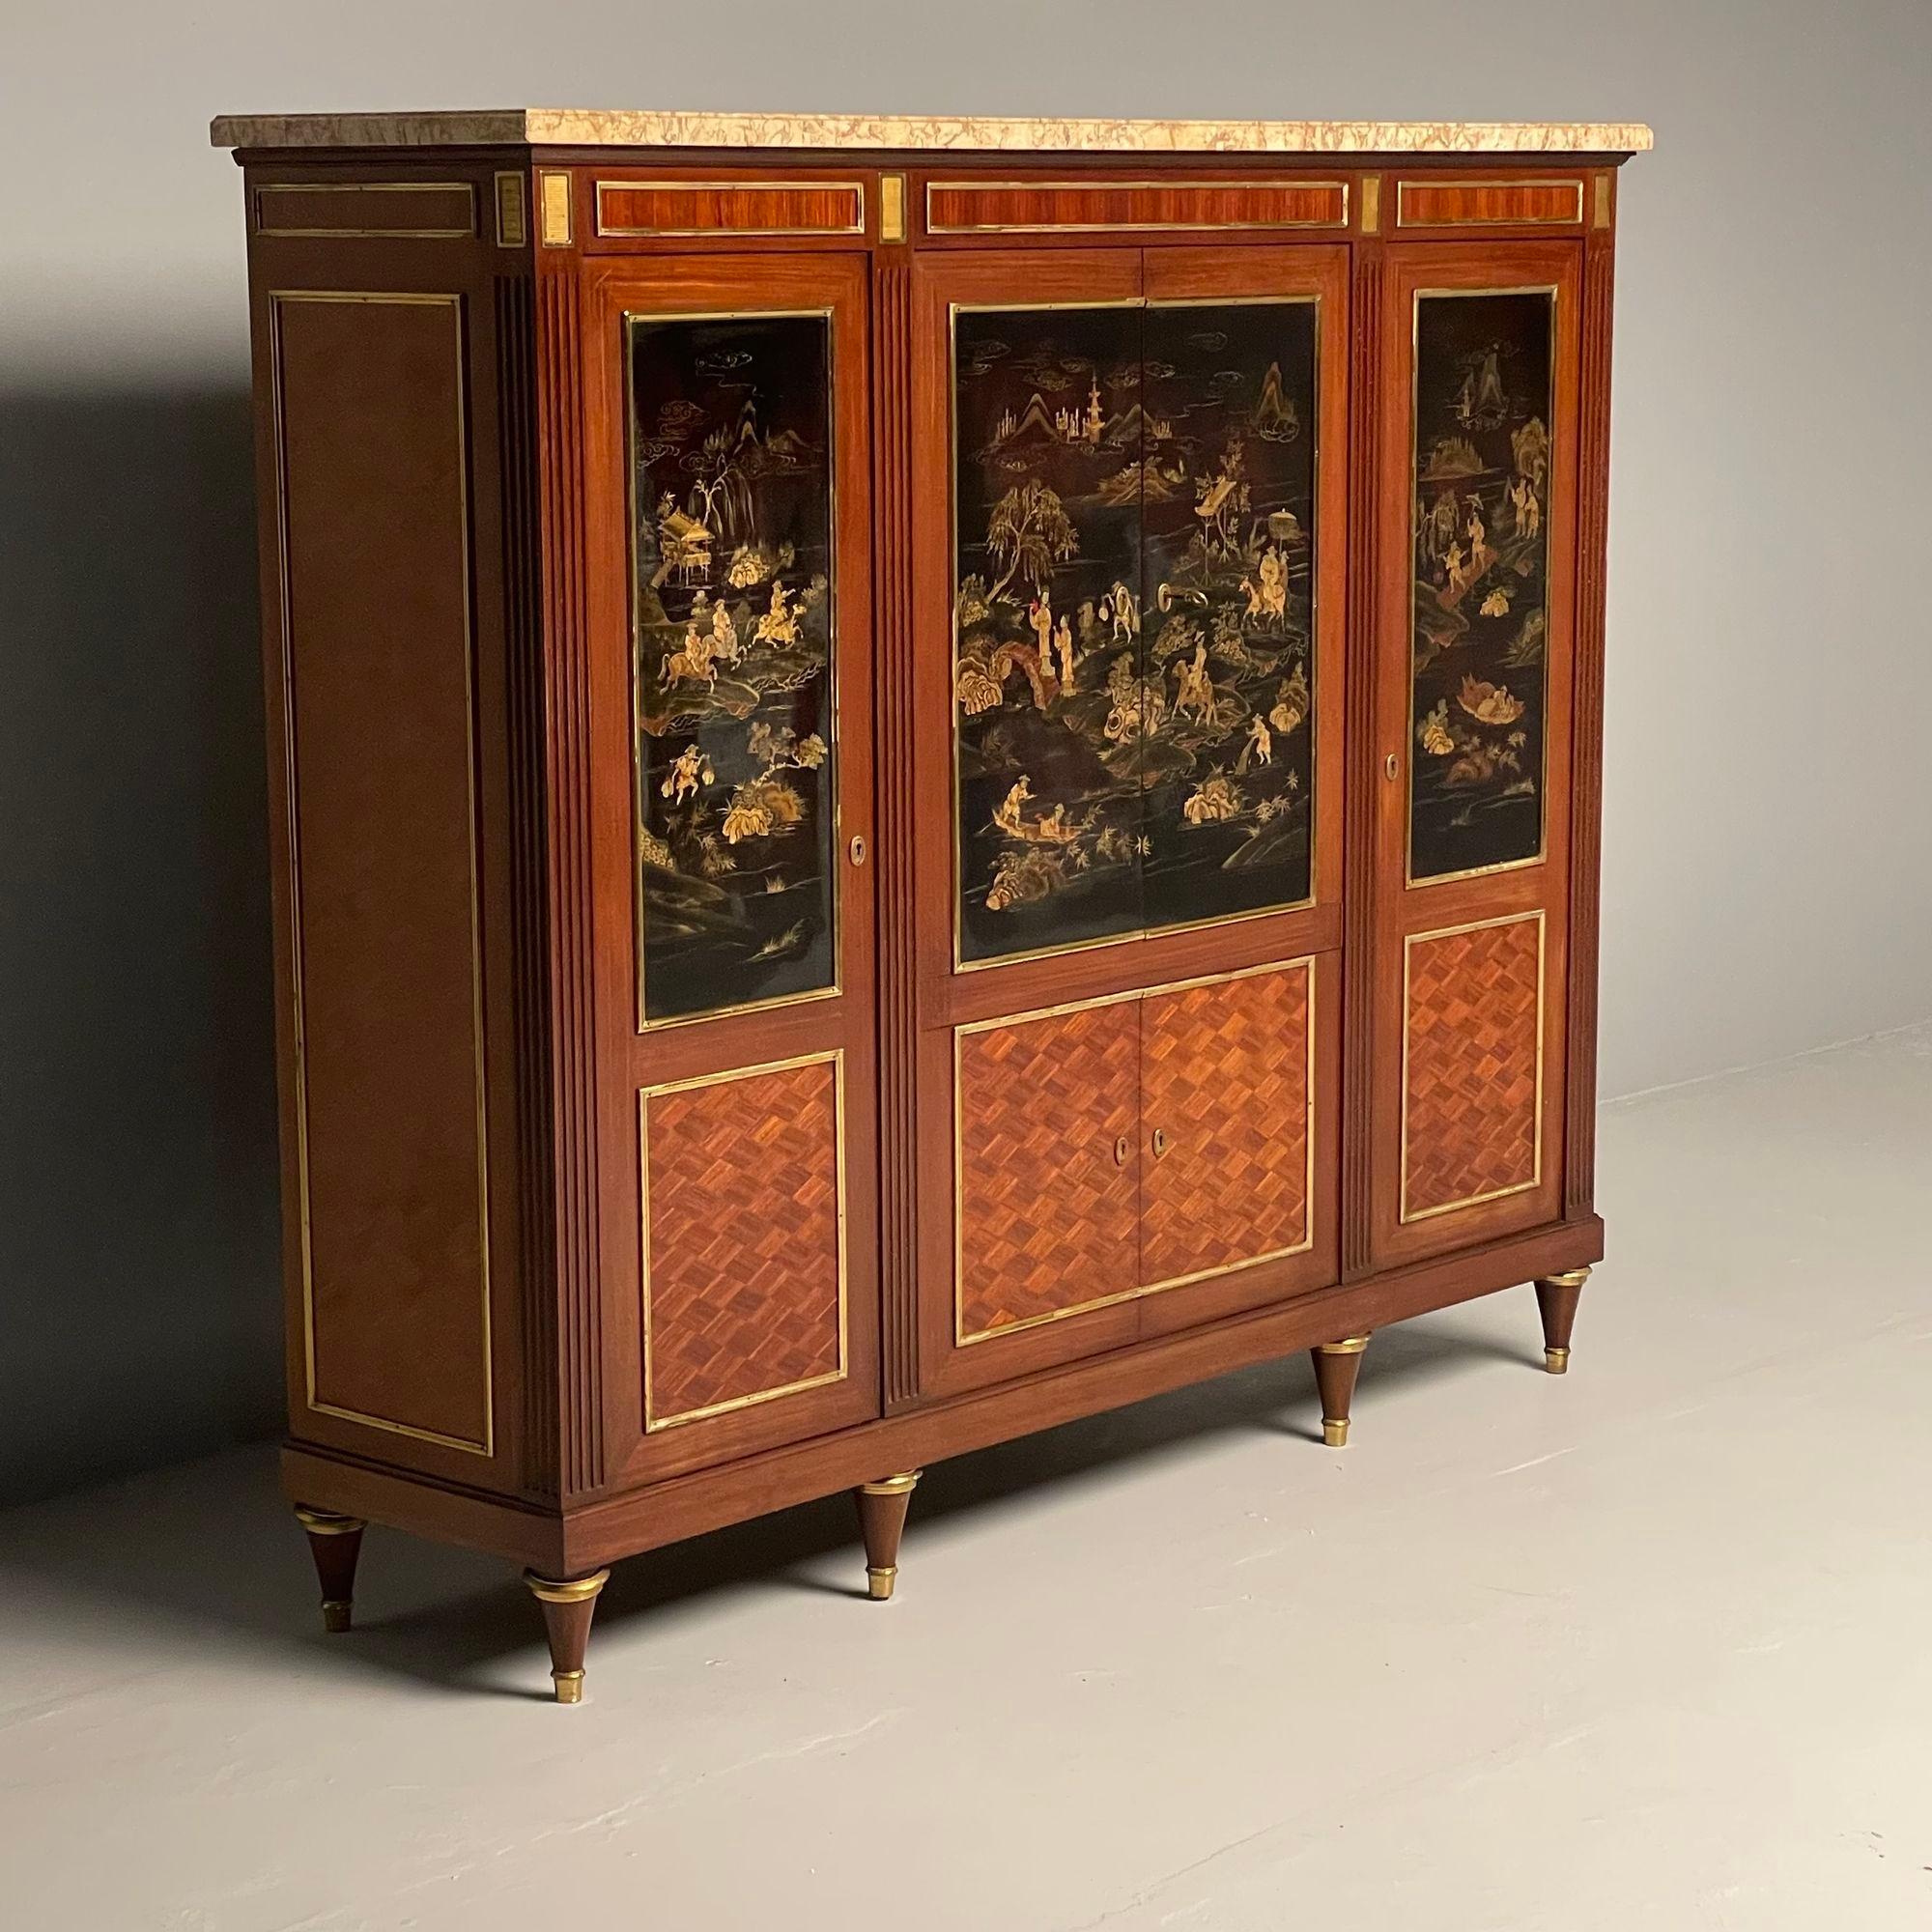 Maison Jansen Style, Louis XVI, Chinoiserie, Mahogany, Black Lacquer, Parquetry In Good Condition For Sale In Stamford, CT